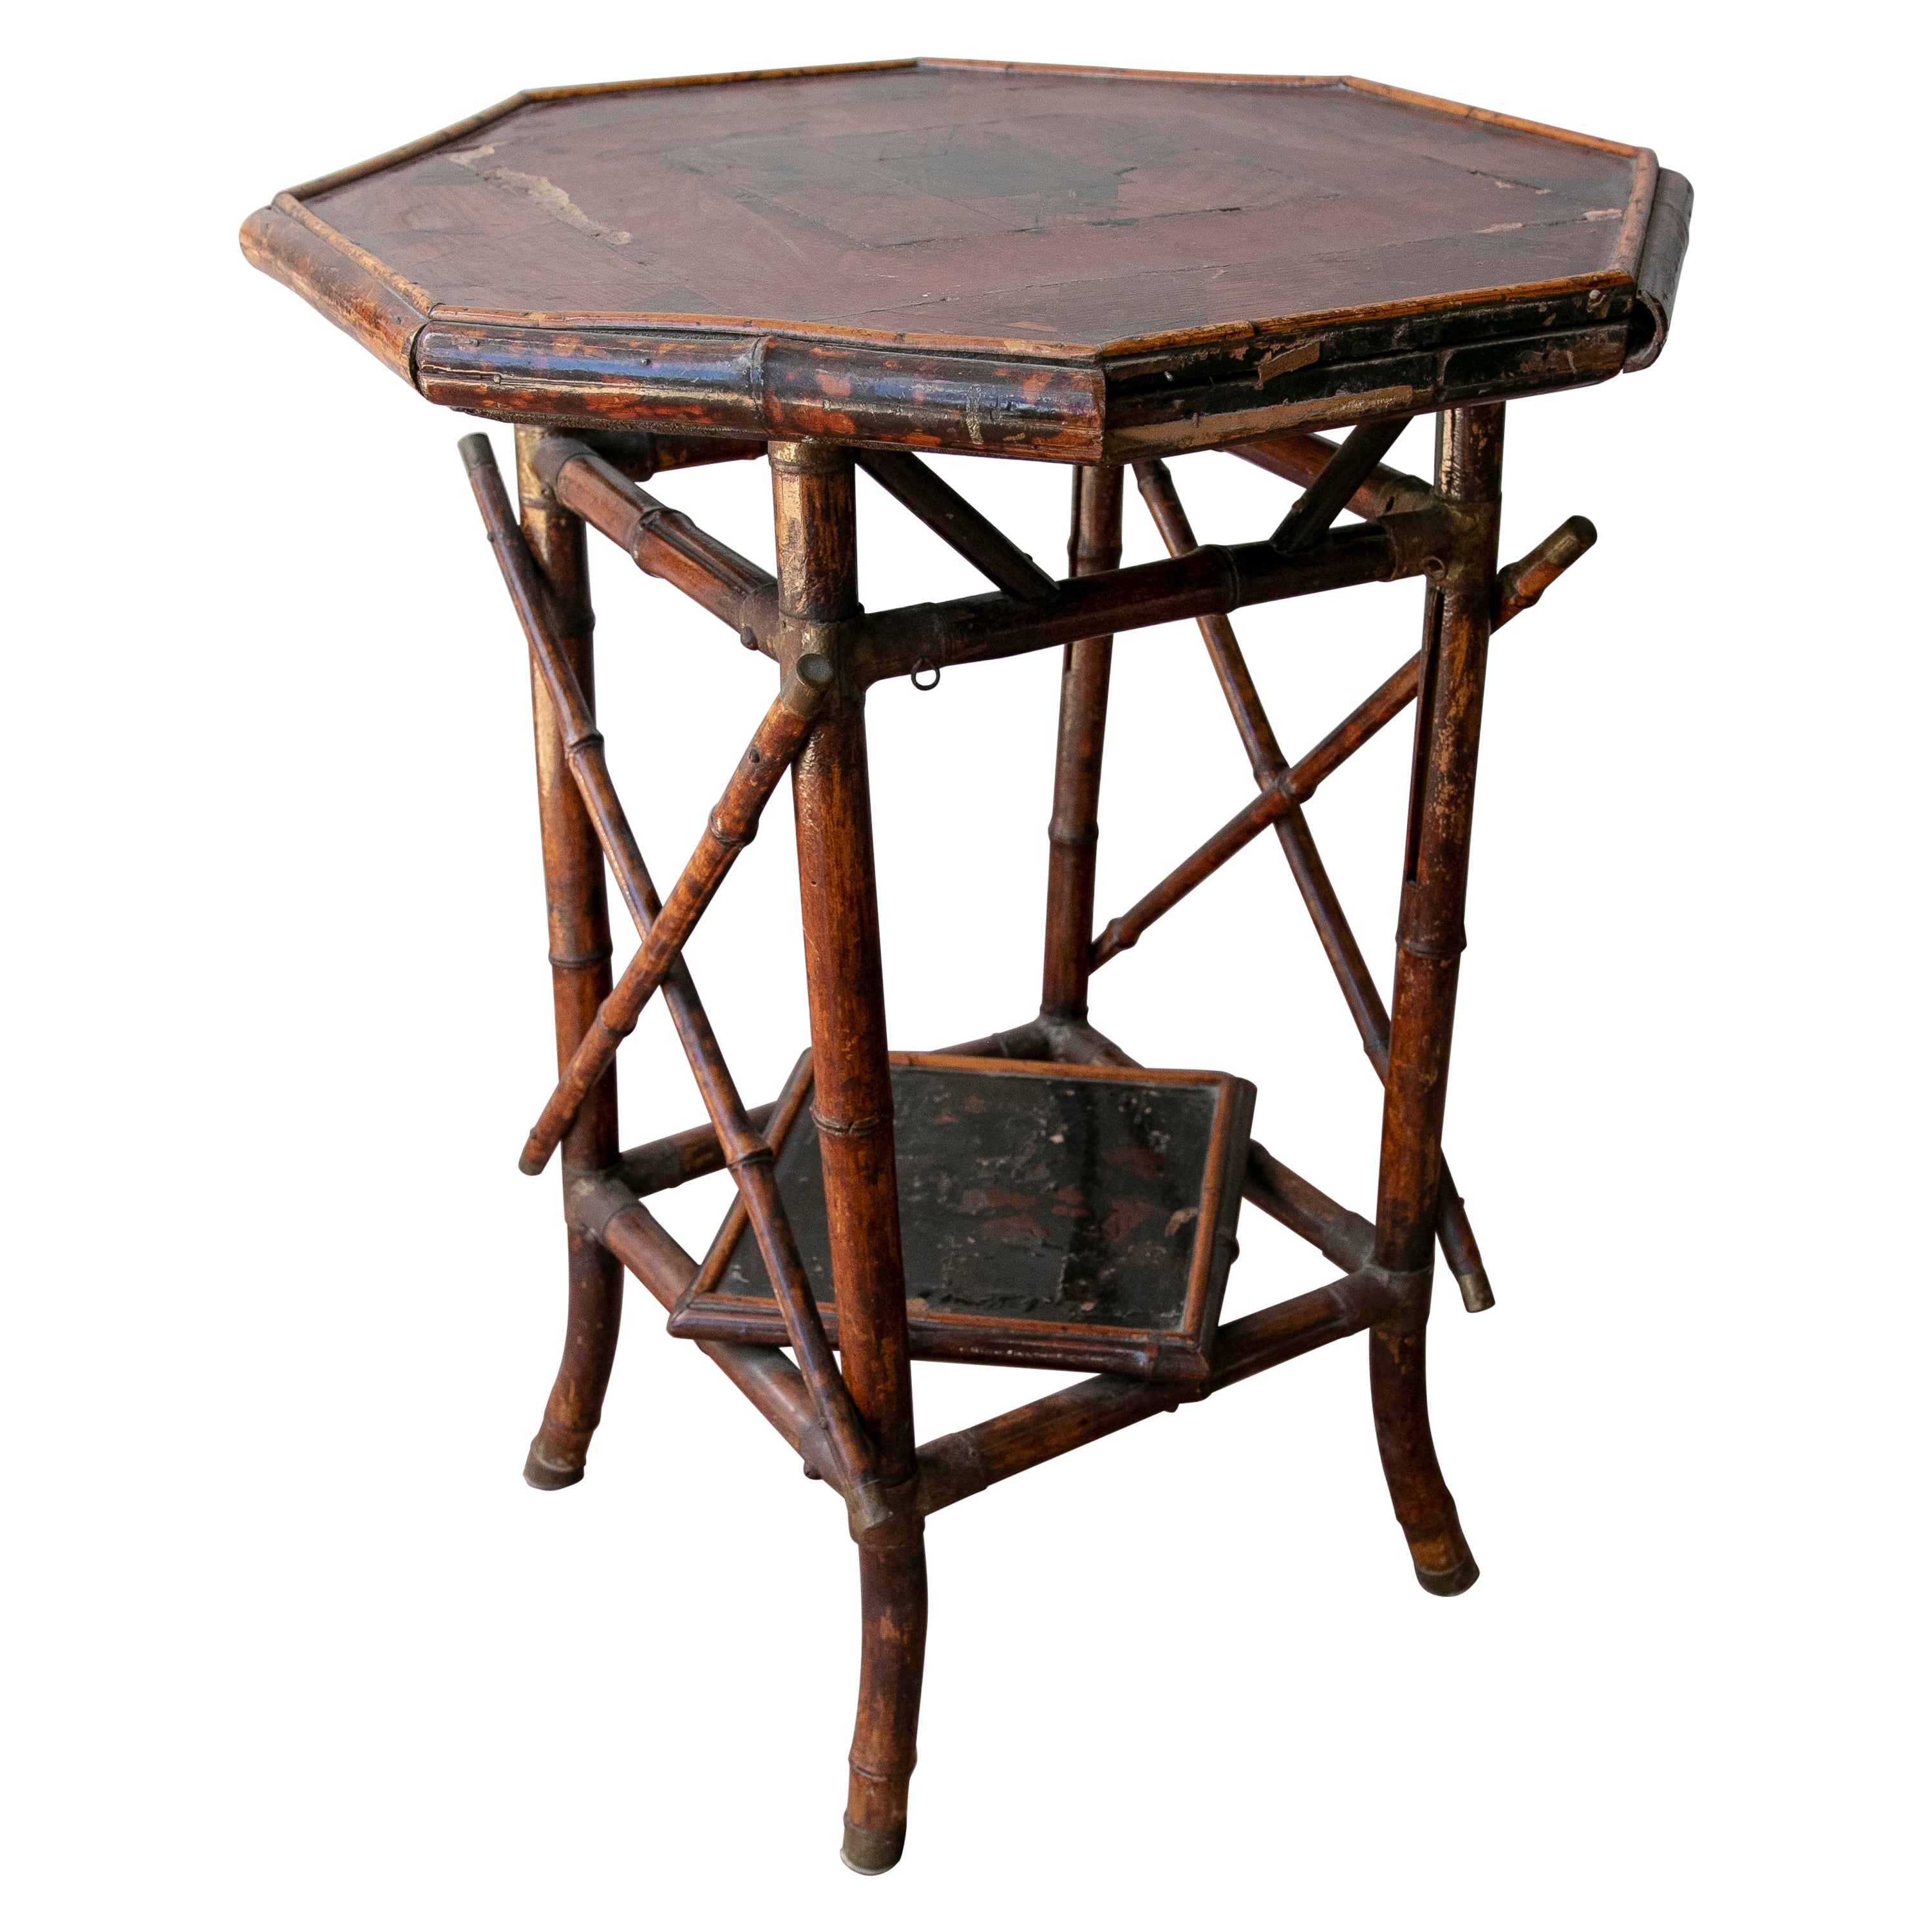 19th Century Chinese Bamboo Side Table with Original Polychromy